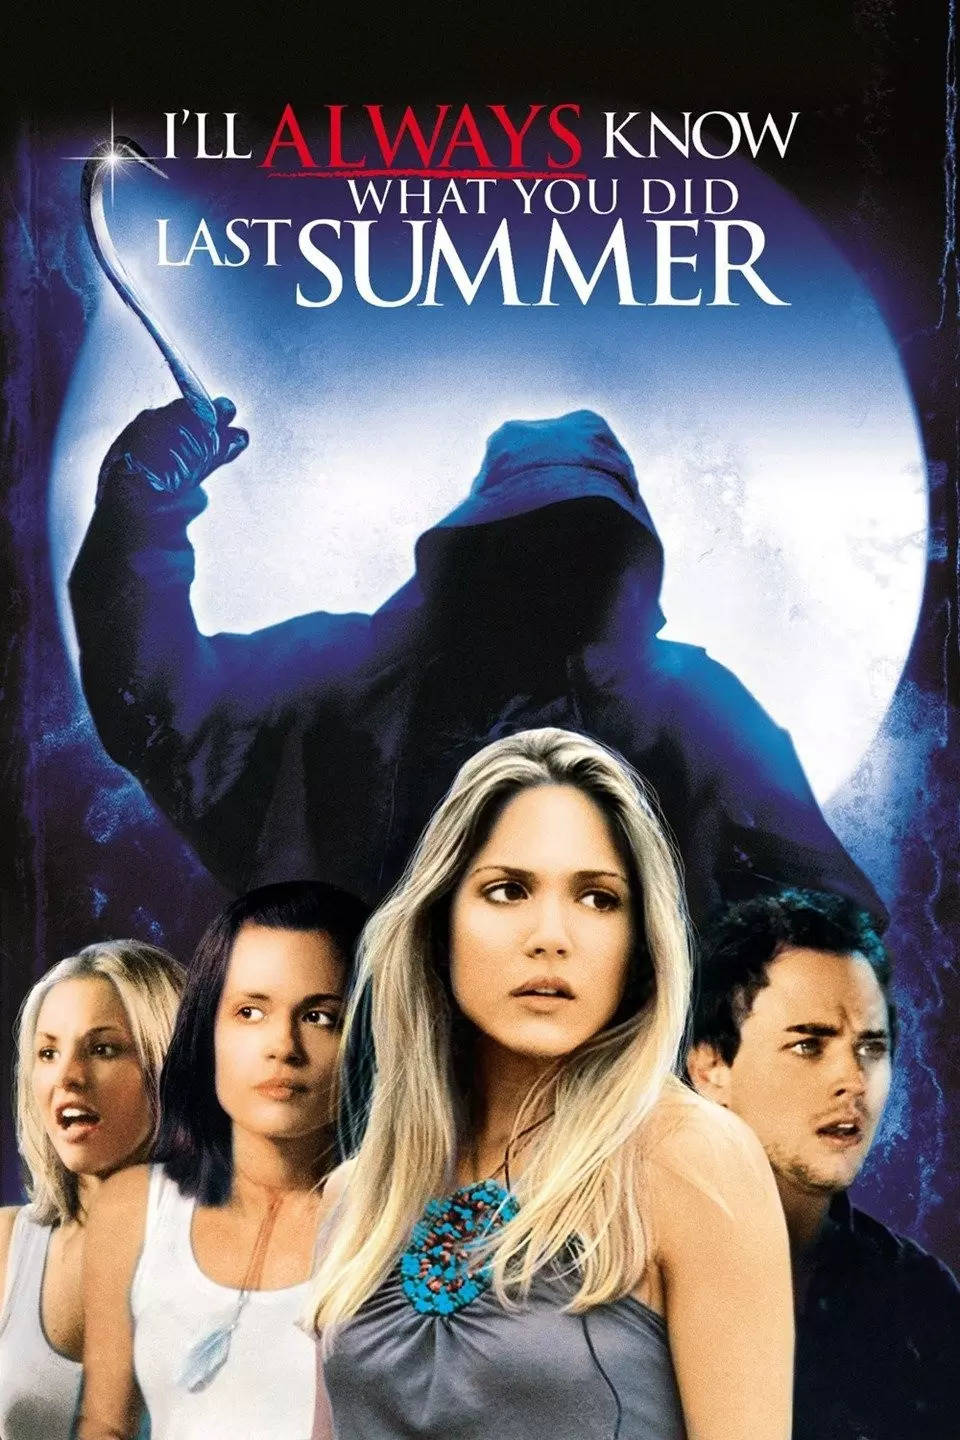 I Know What You Did Last Summer 2:  When will the sequel release and will the original cast return? 